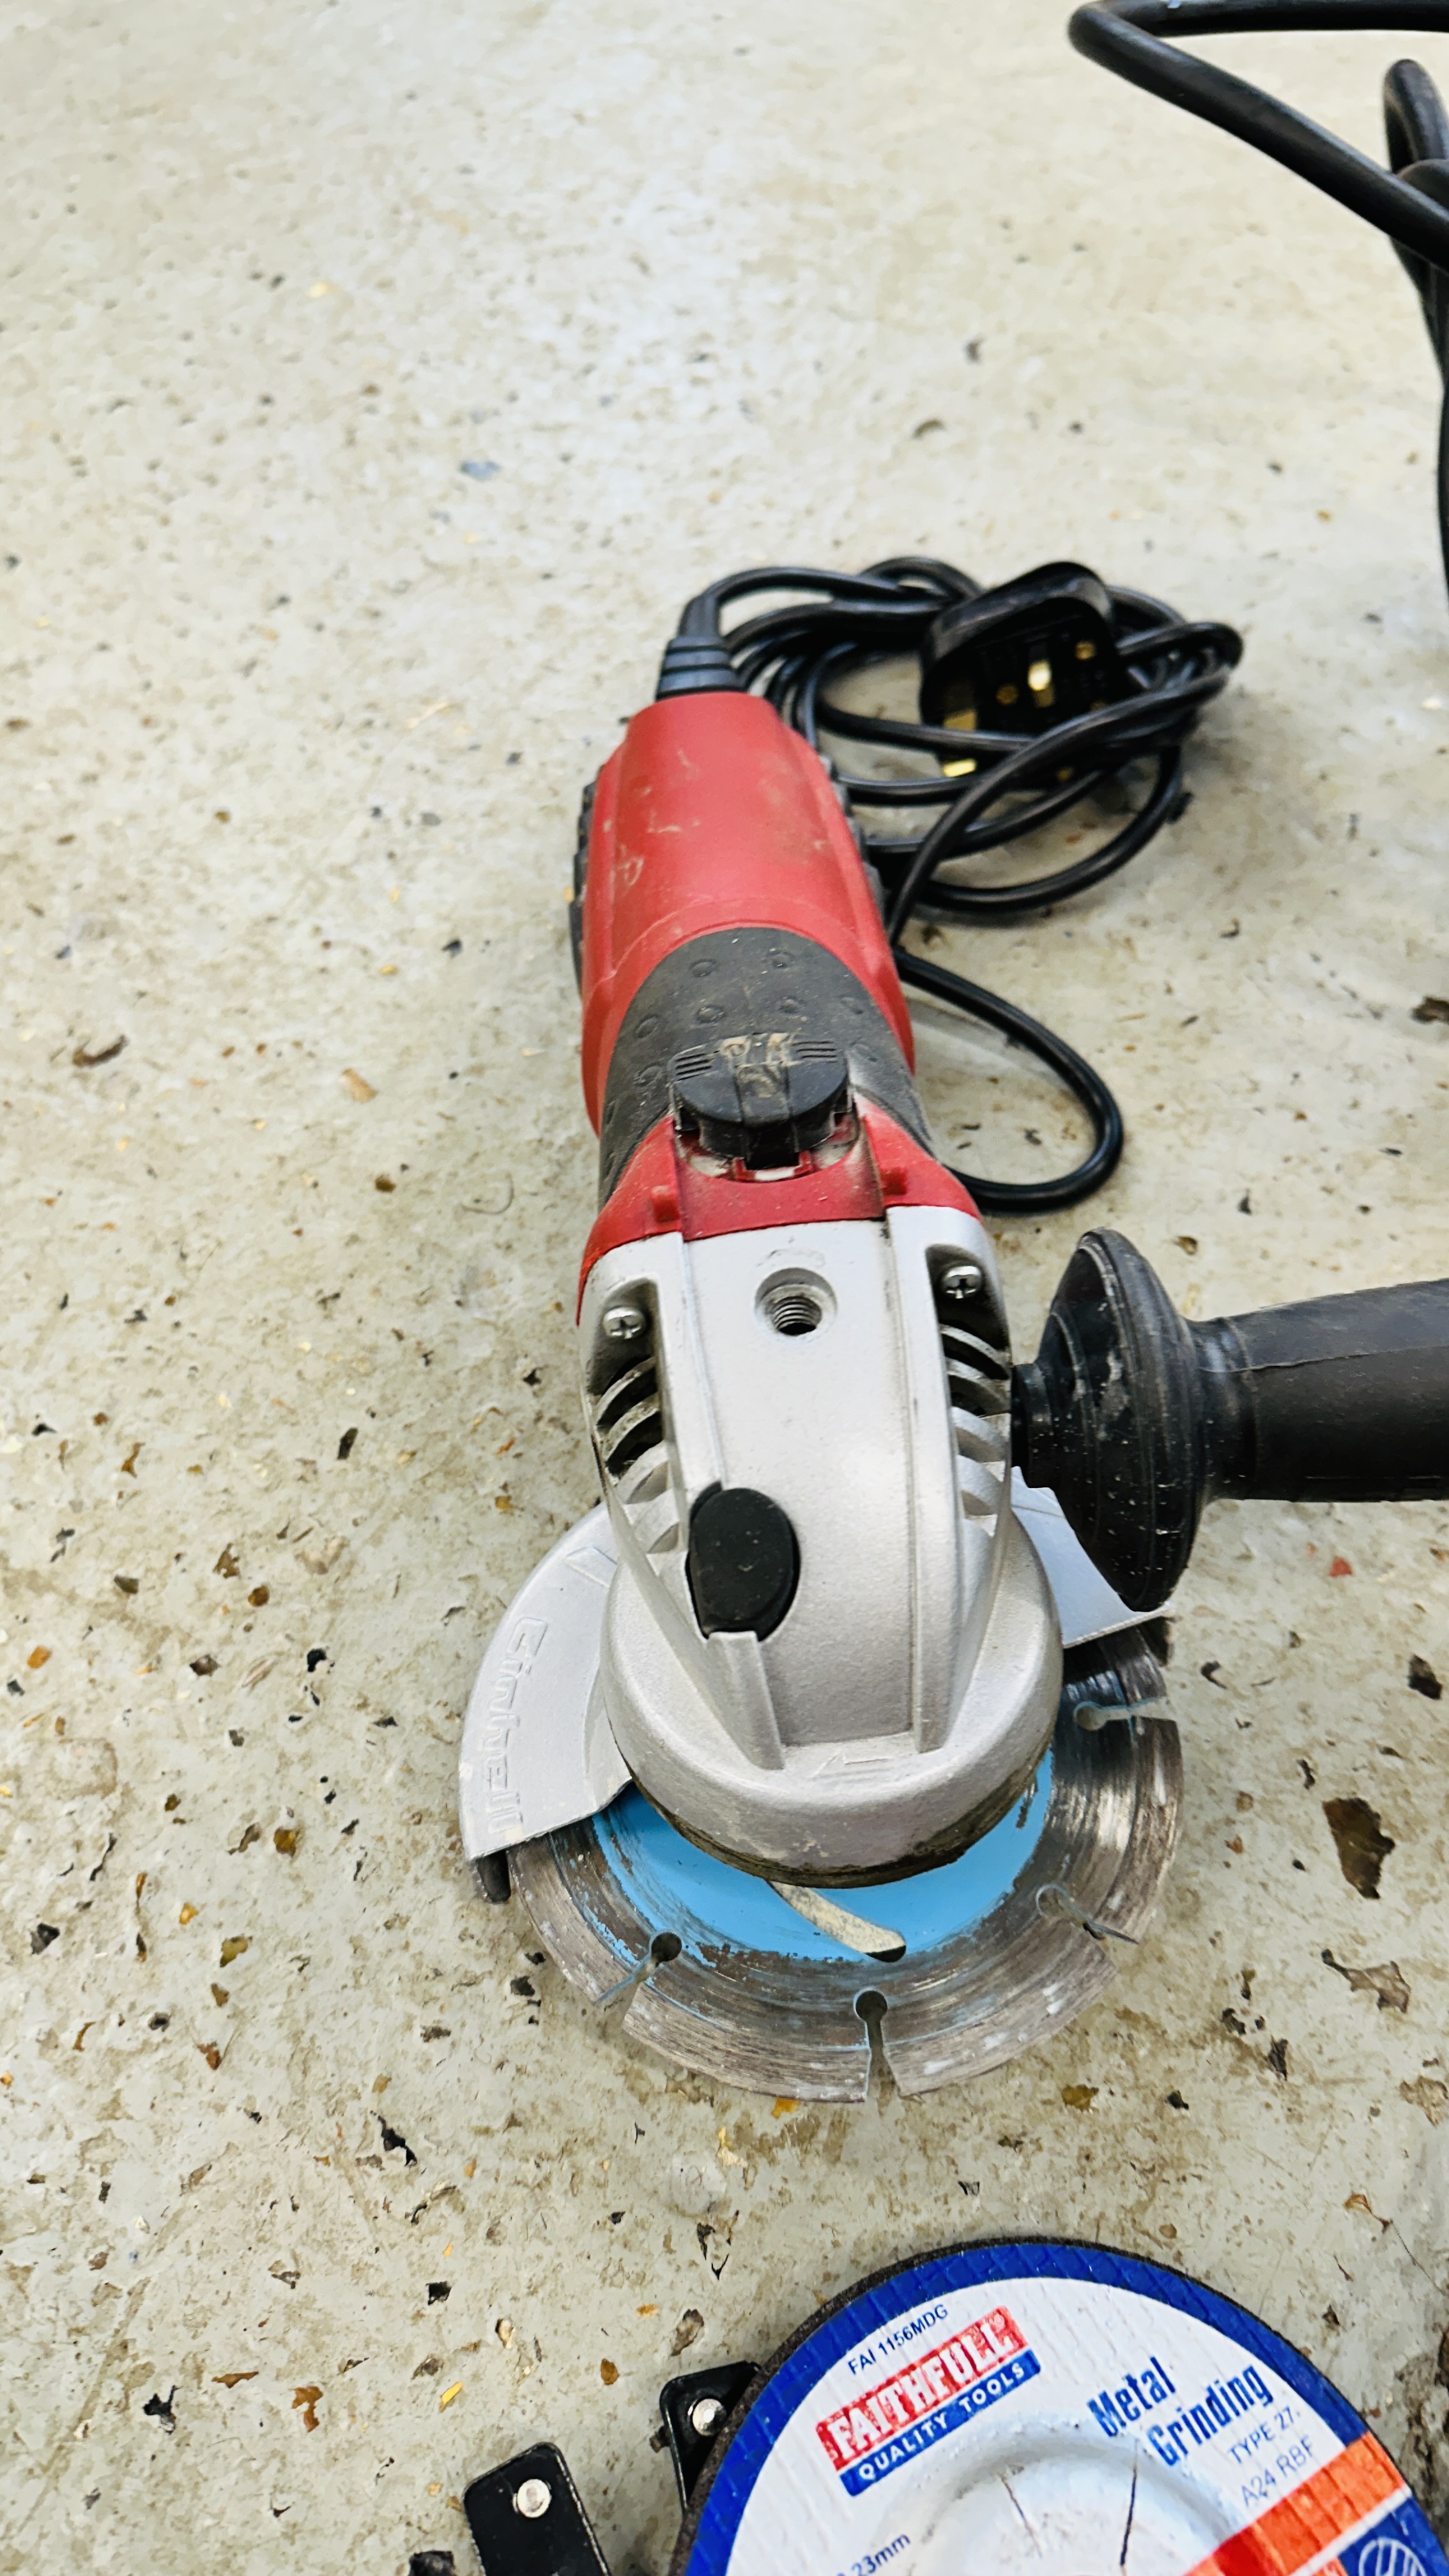 BOSCH GKS 190 CIRCULAR SAW ALONG WITH EINHELL 4 INCH GRINDER AND MACALLISTER MSCS110 SANDER - SOLD - Image 4 of 5